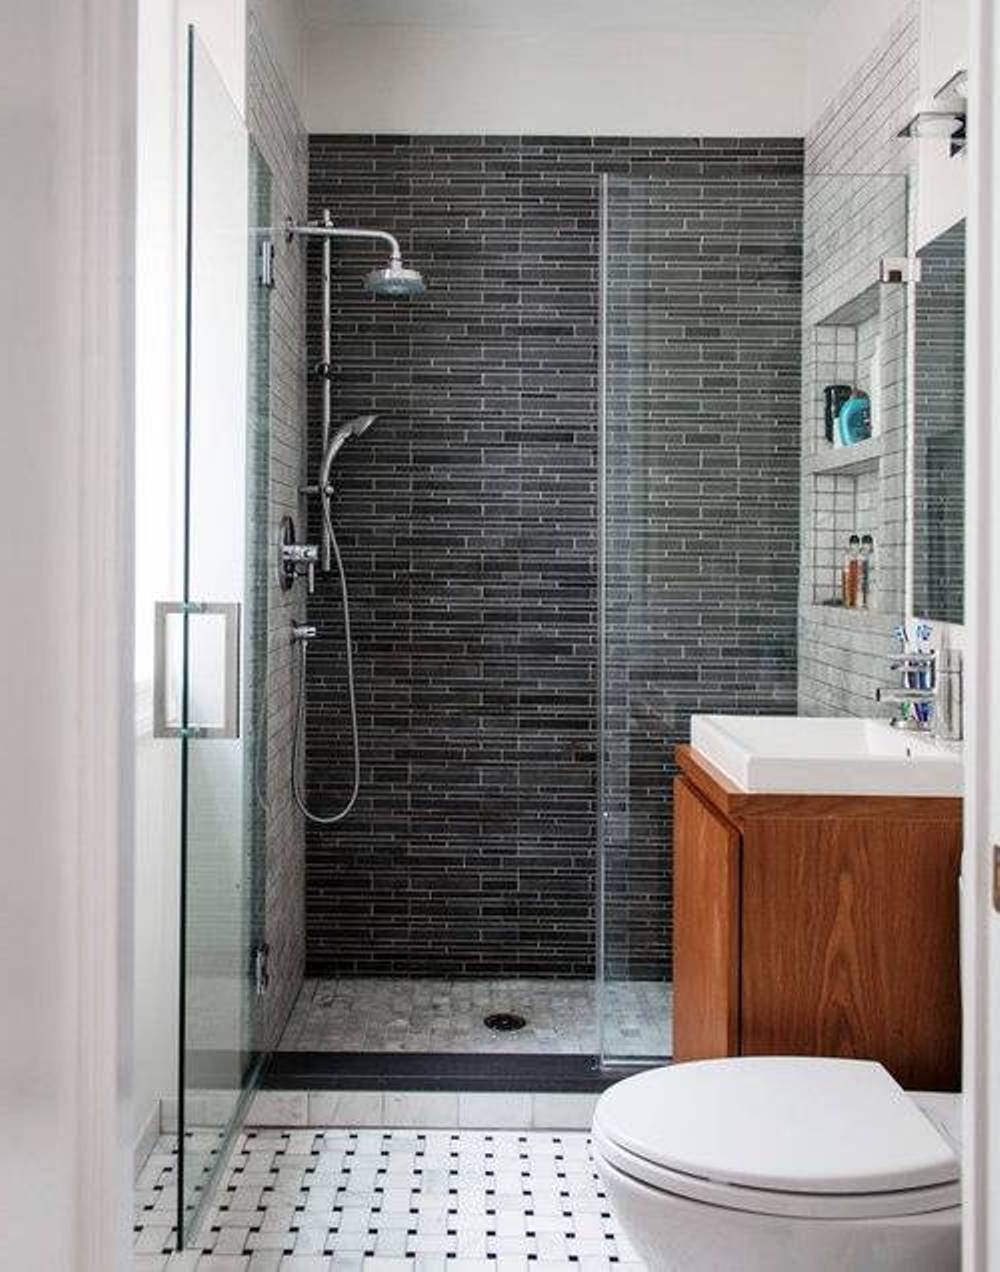 Cool-Ideas-About-Designing-Small-Bathrooms-Shower